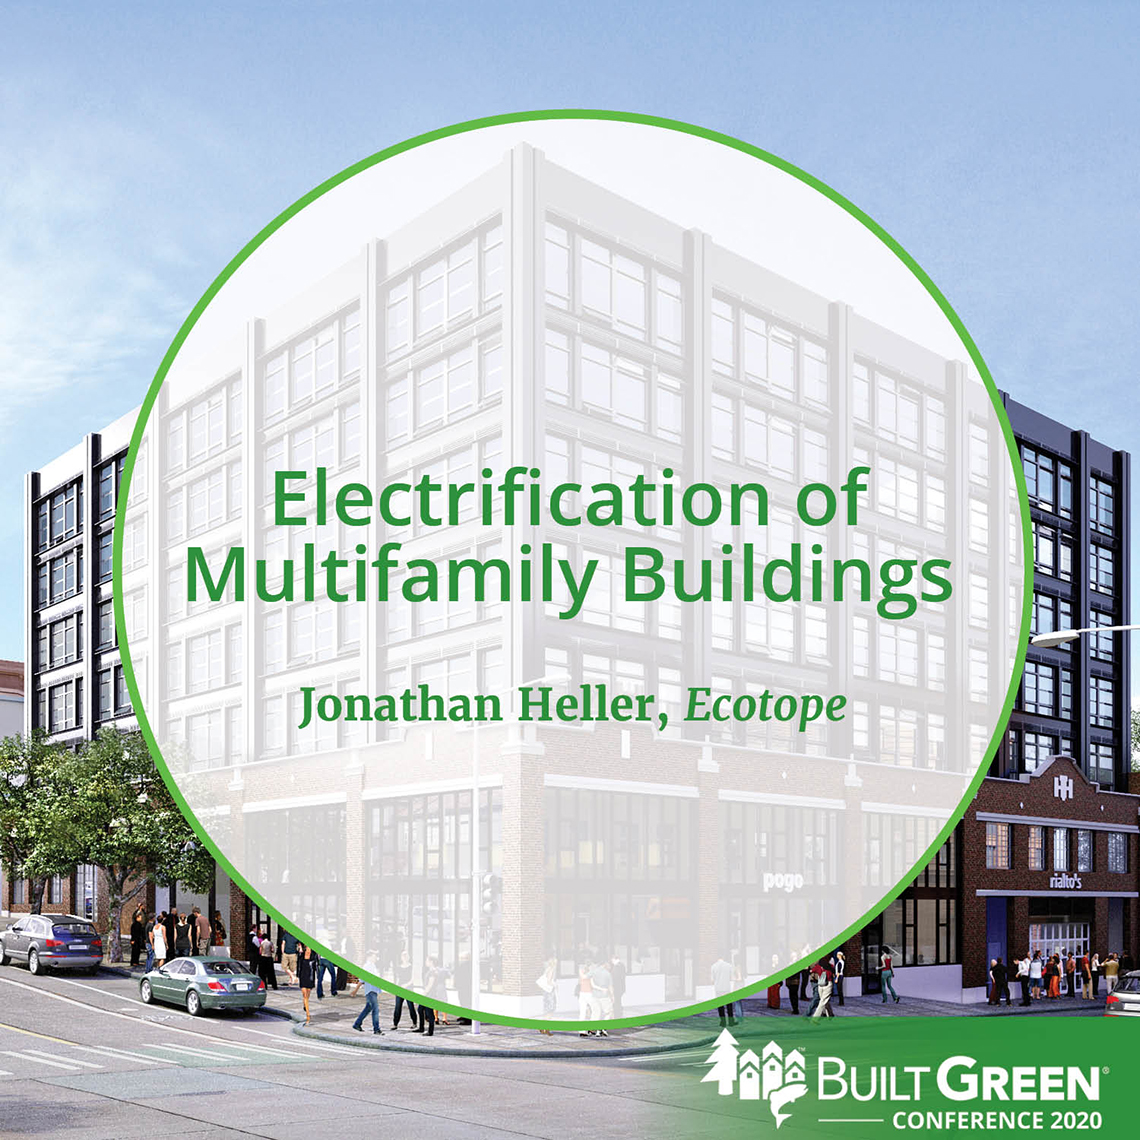 Built Green Conference Session: Electrification of Multifamily Buildings, featuring Jonathan Heller, Ecotope